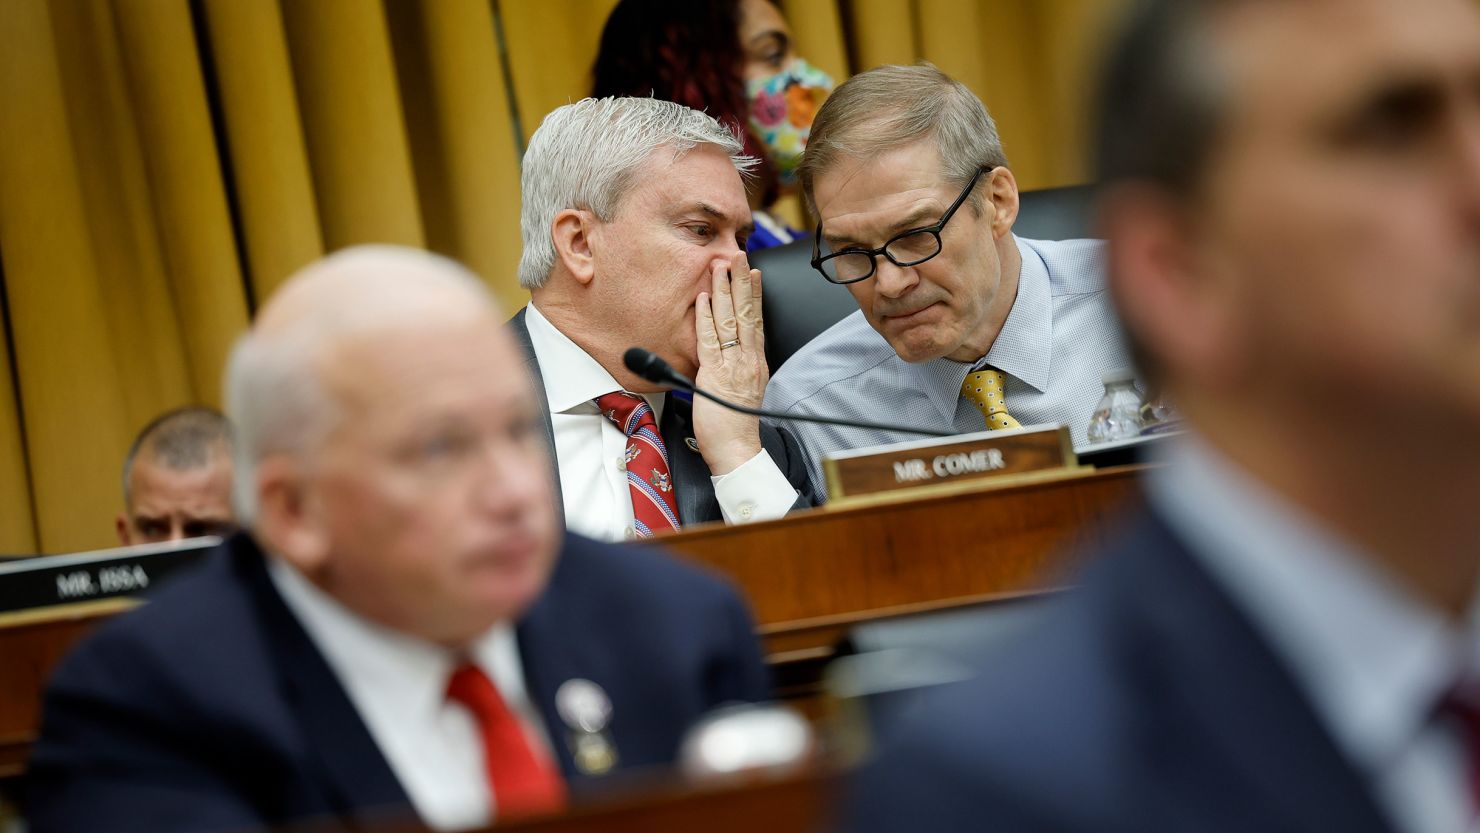 Rep. James Comer talks to Chairman of the House Judiciary Committee Chairman Rep. Jim Jordan during a hearing on March 12, in Washington, DC.